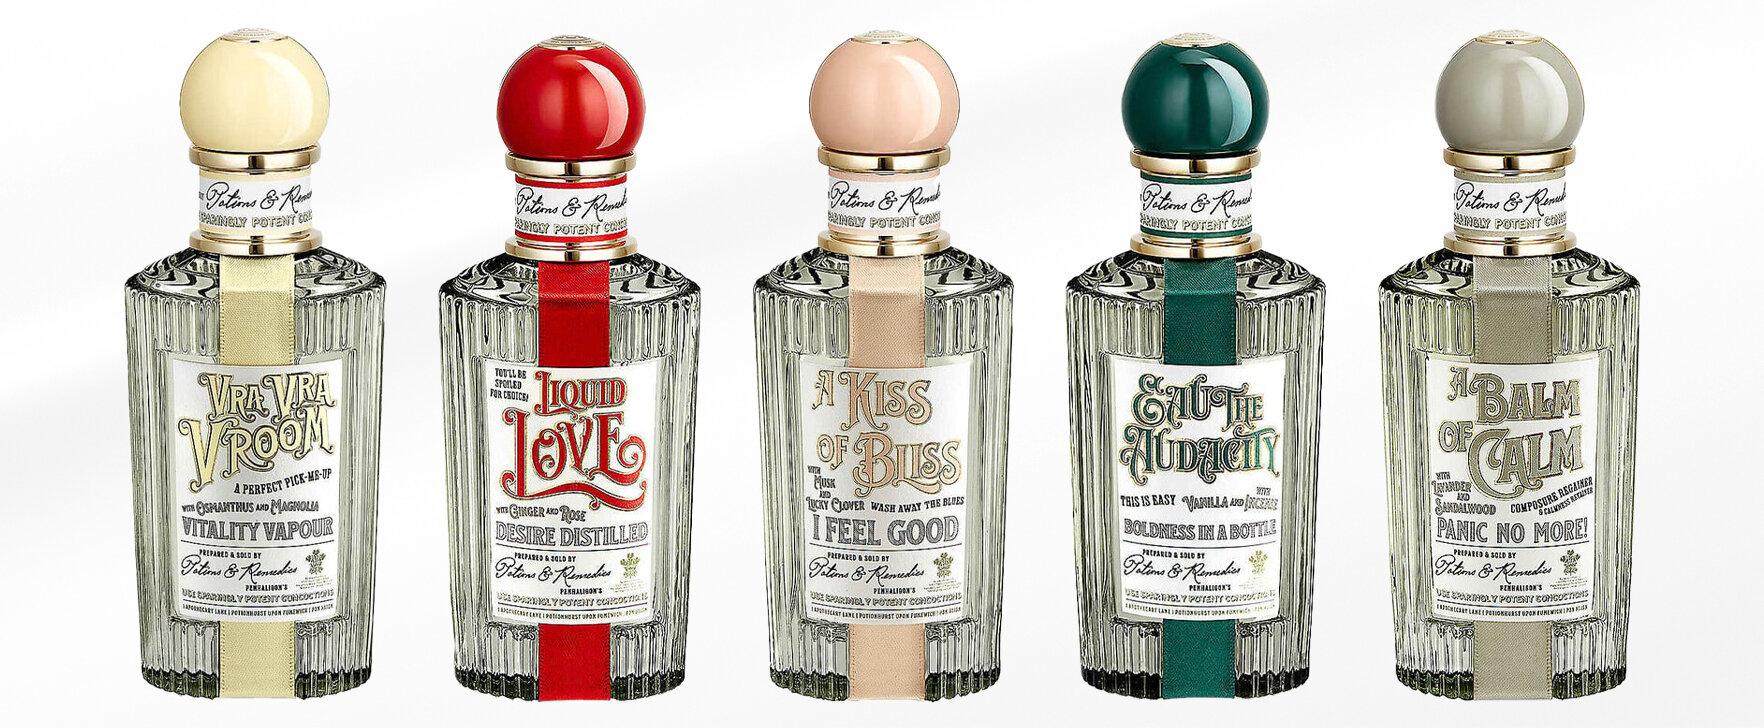 "Potions & Remedies": The New Fragrance Collection From Penhaligon's